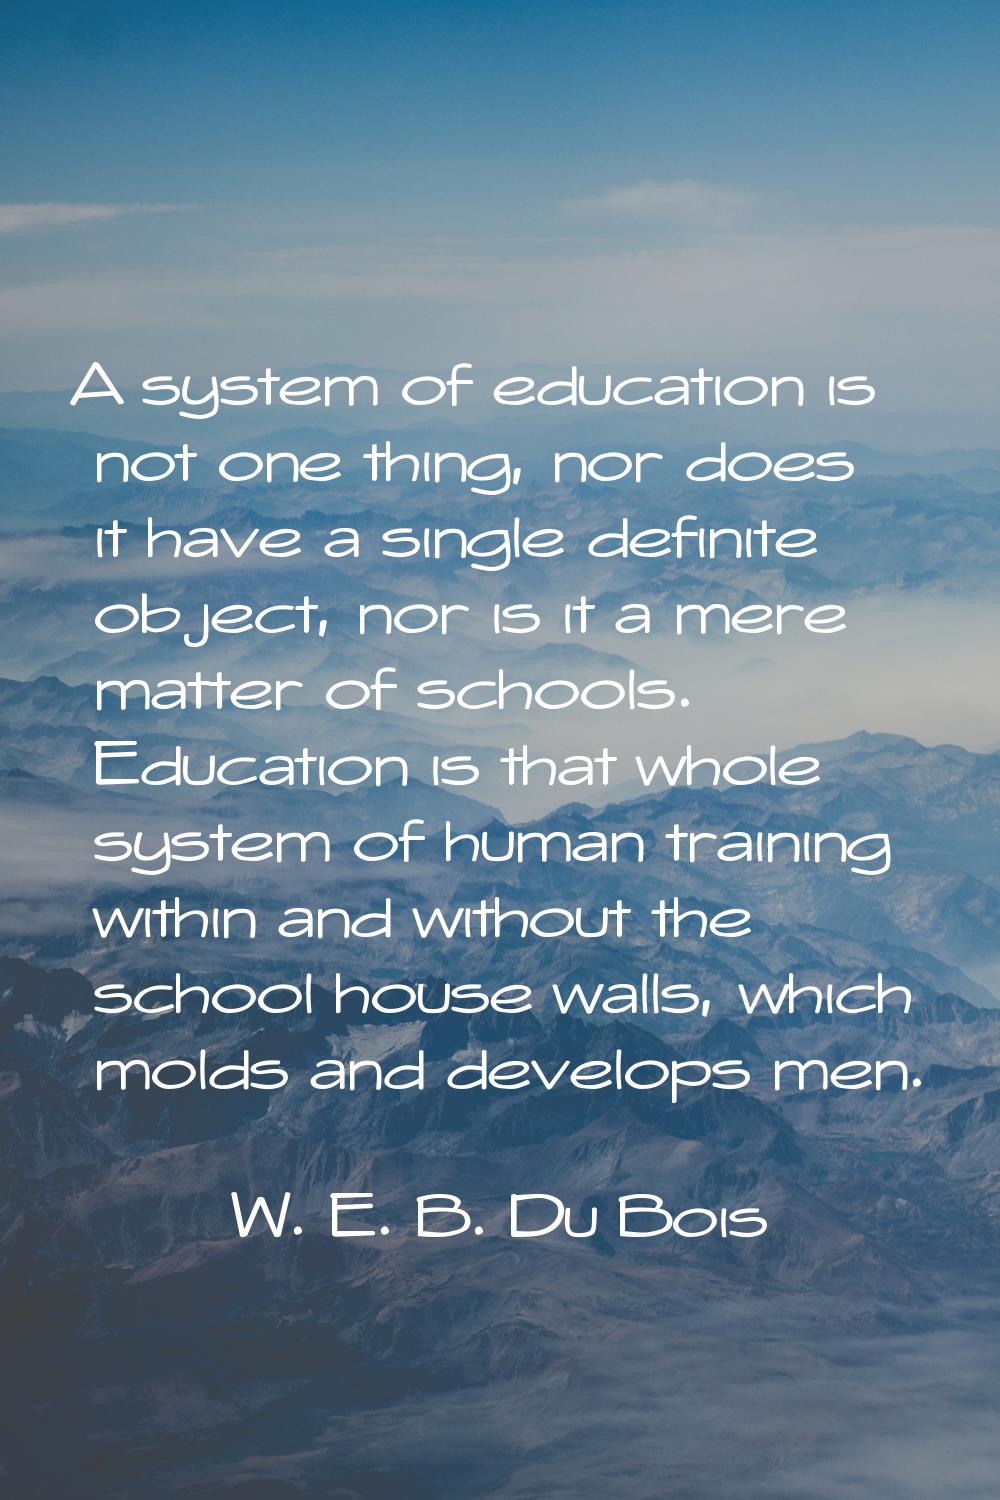 A system of education is not one thing, nor does it have a single definite object, nor is it a mere